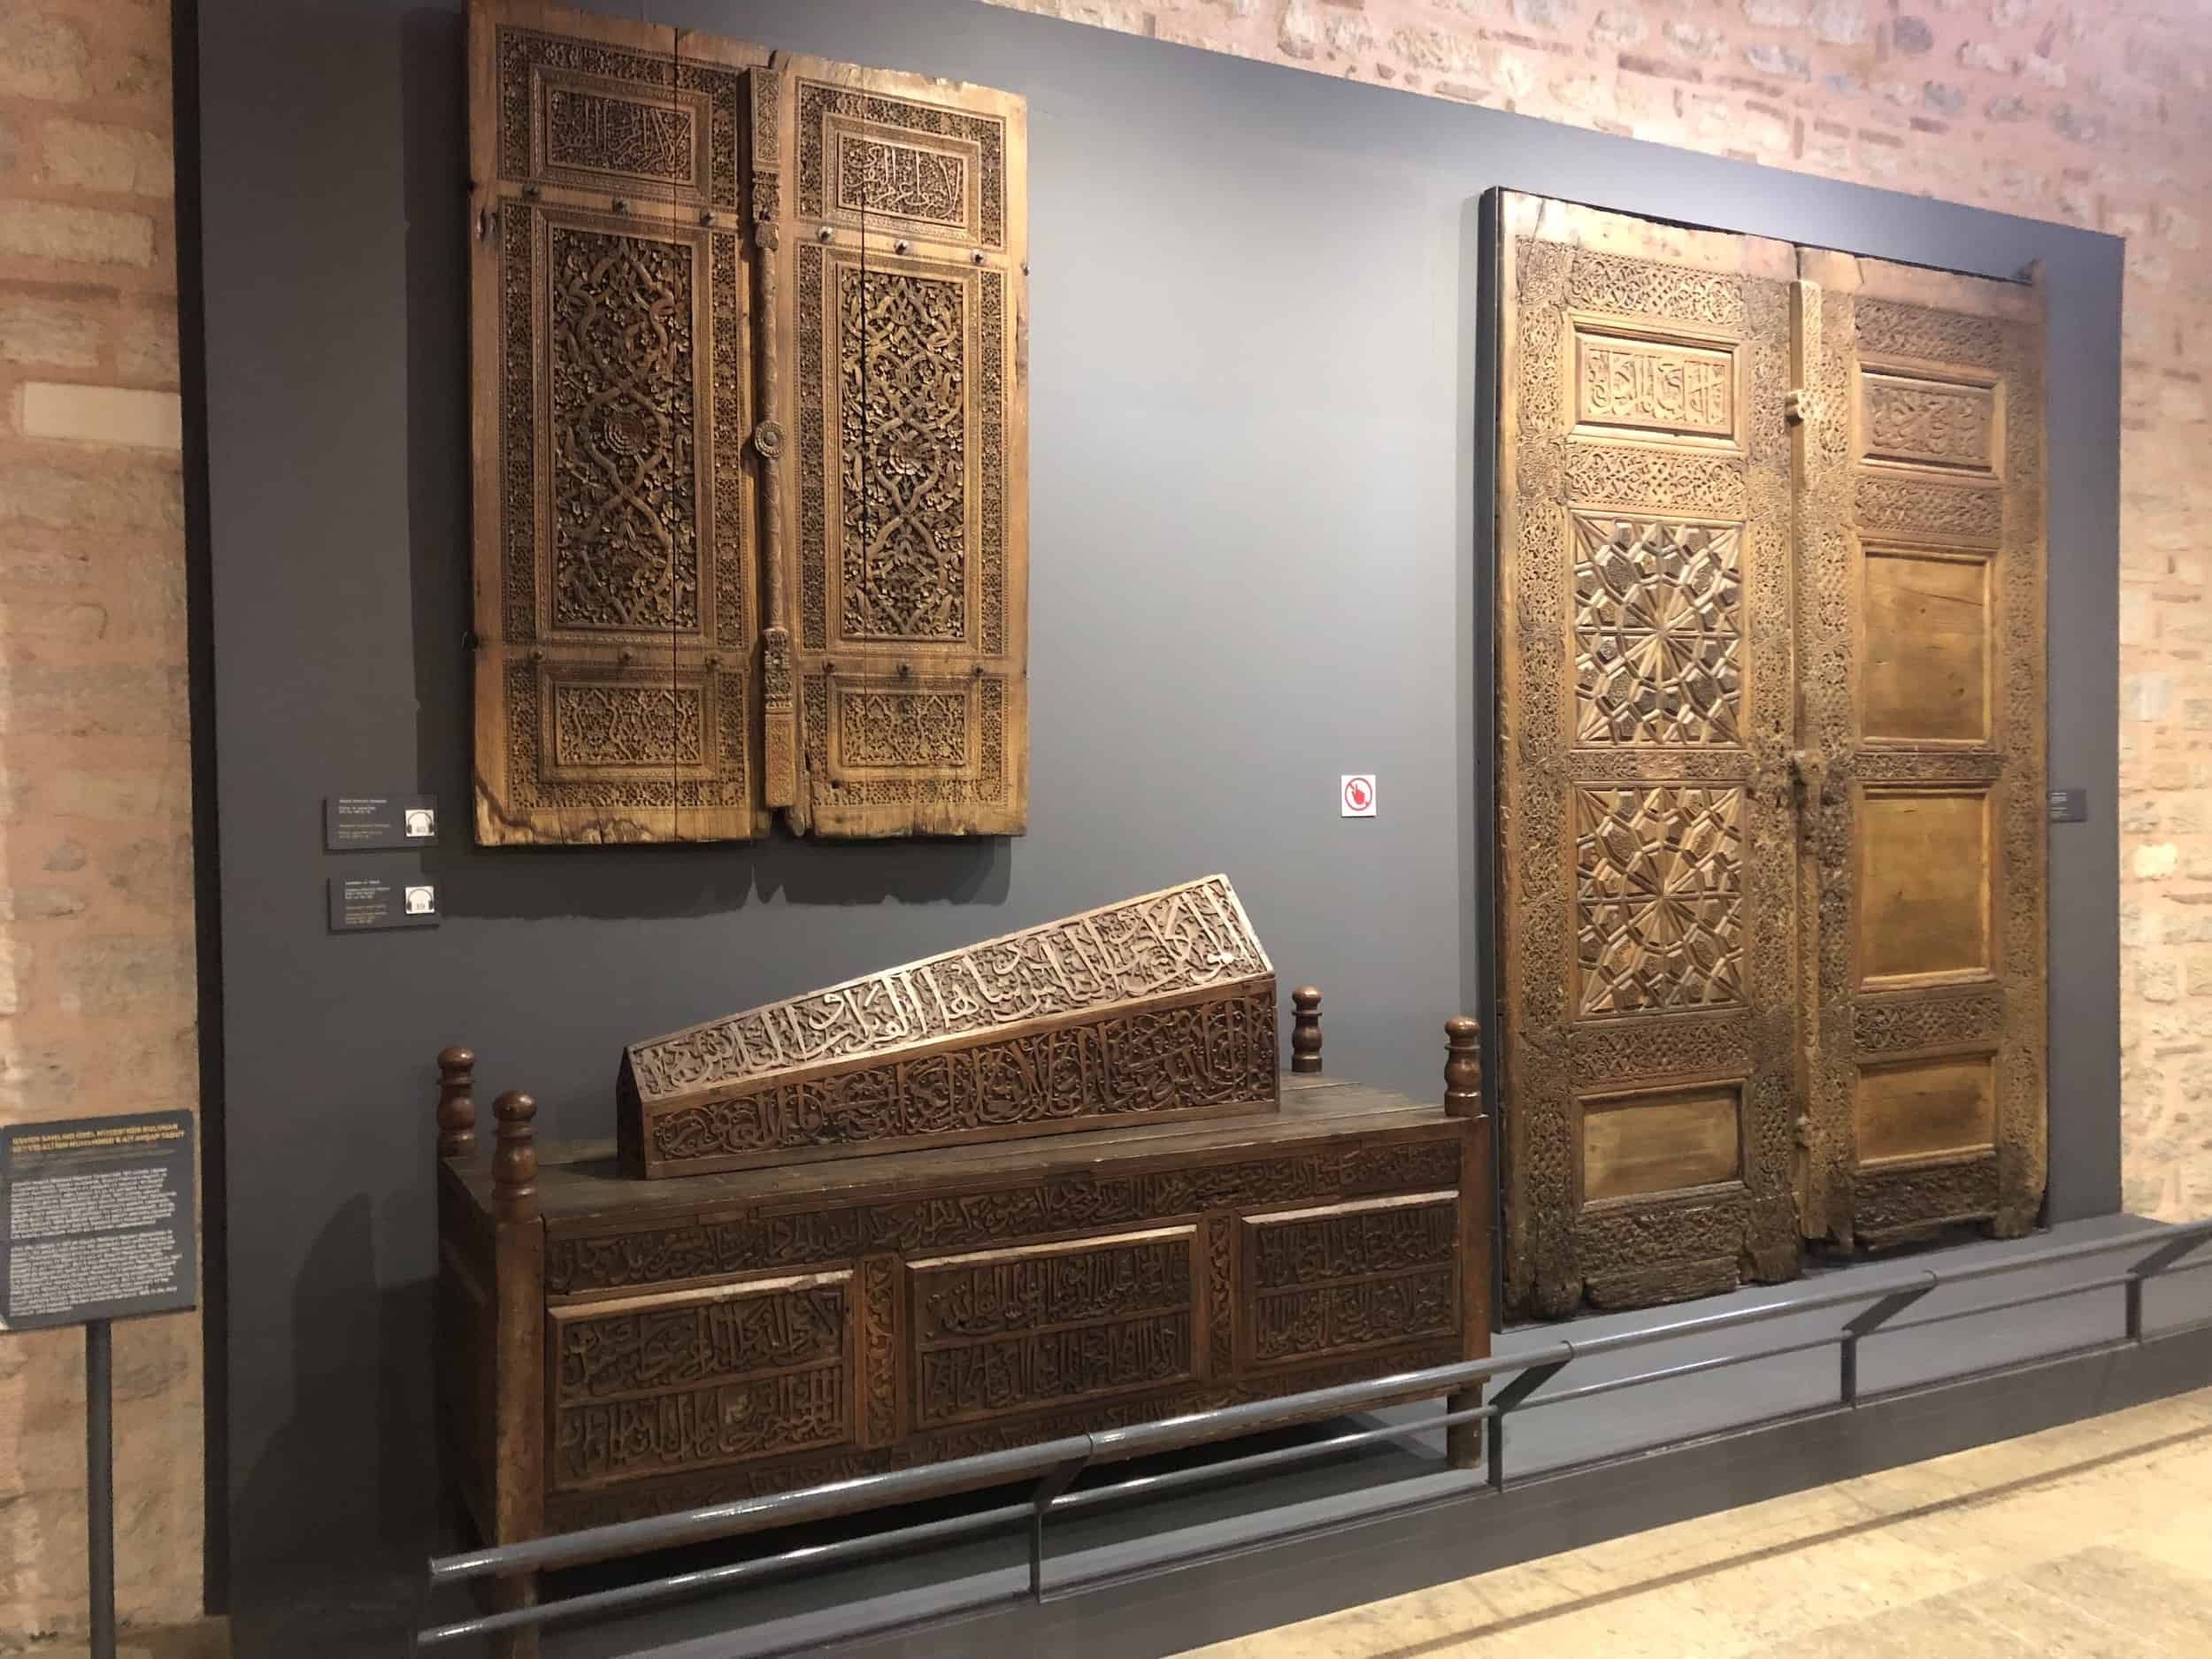 Wooden artifacts in Principalities and Early Ottoman Empire at the Museum of Turkish and Islamic Arts in Istanbul, Turkey